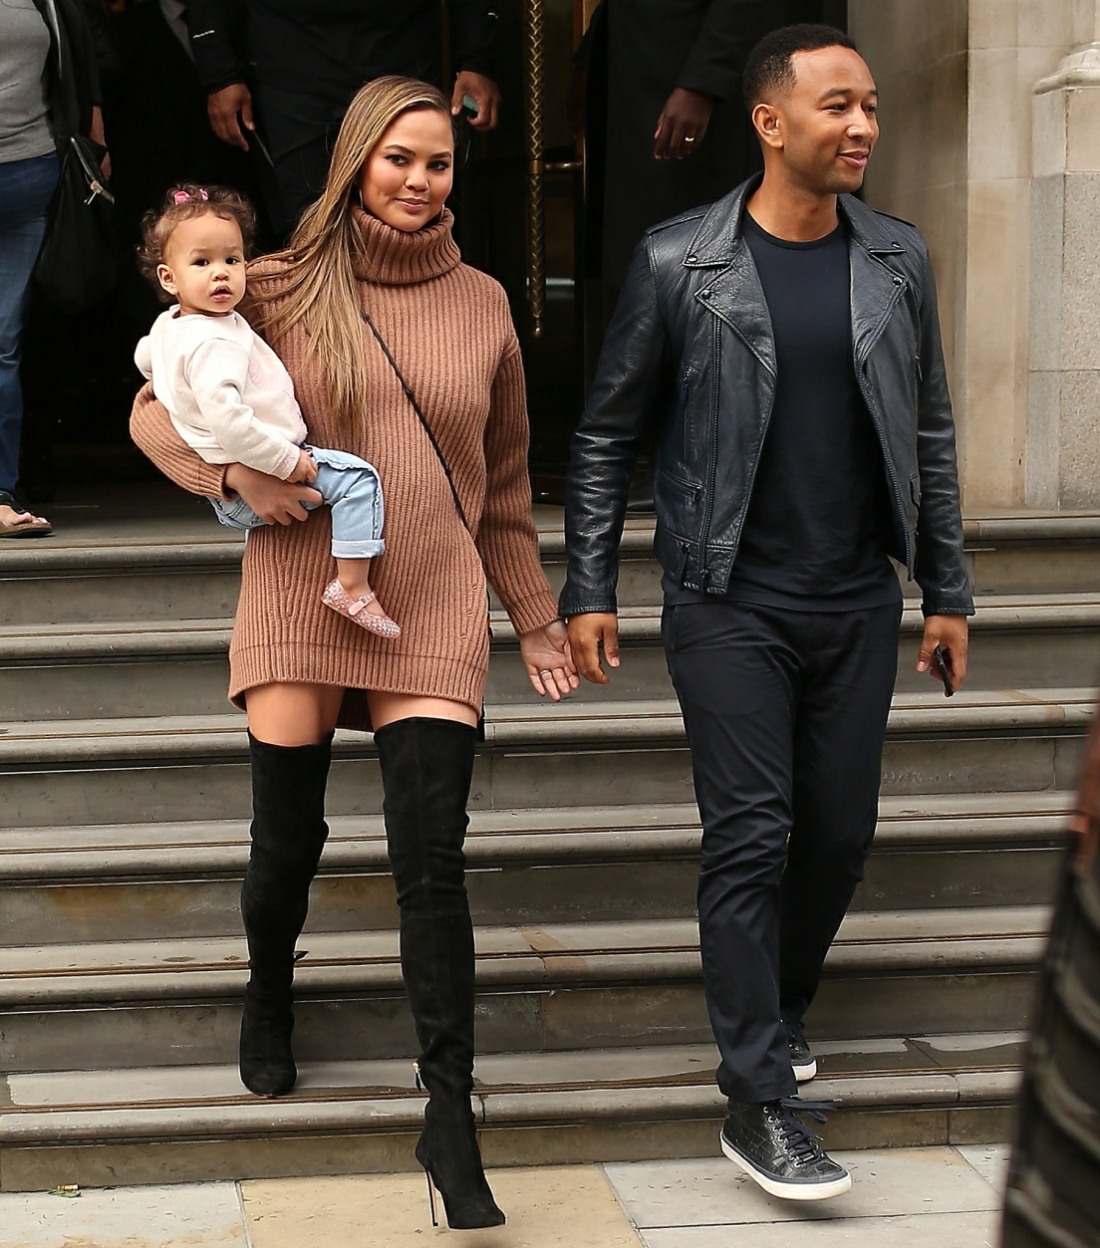 John Legend and Chrissy Teigen leave Corinthia Hotel with their daughter and head for a late lunch